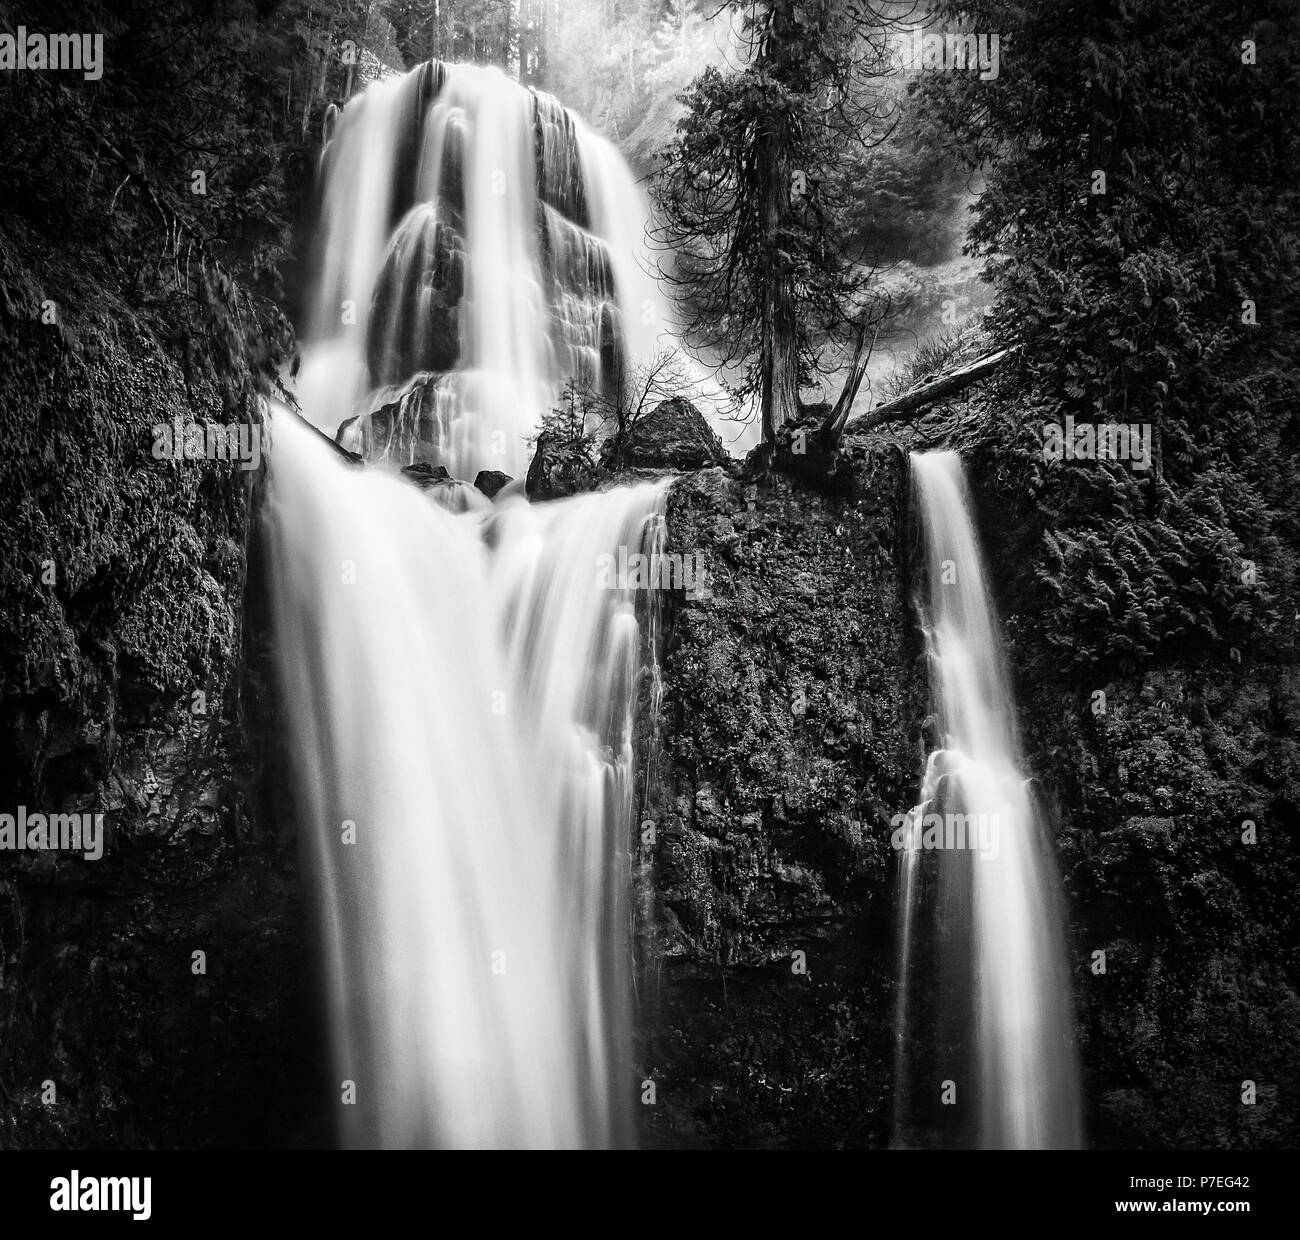 Black and white, high contrast, falls Creek Falls. An impressive, double-tiered, 335-foot high waterfall in the Gifford Pinchot National Forest. Stock Photo